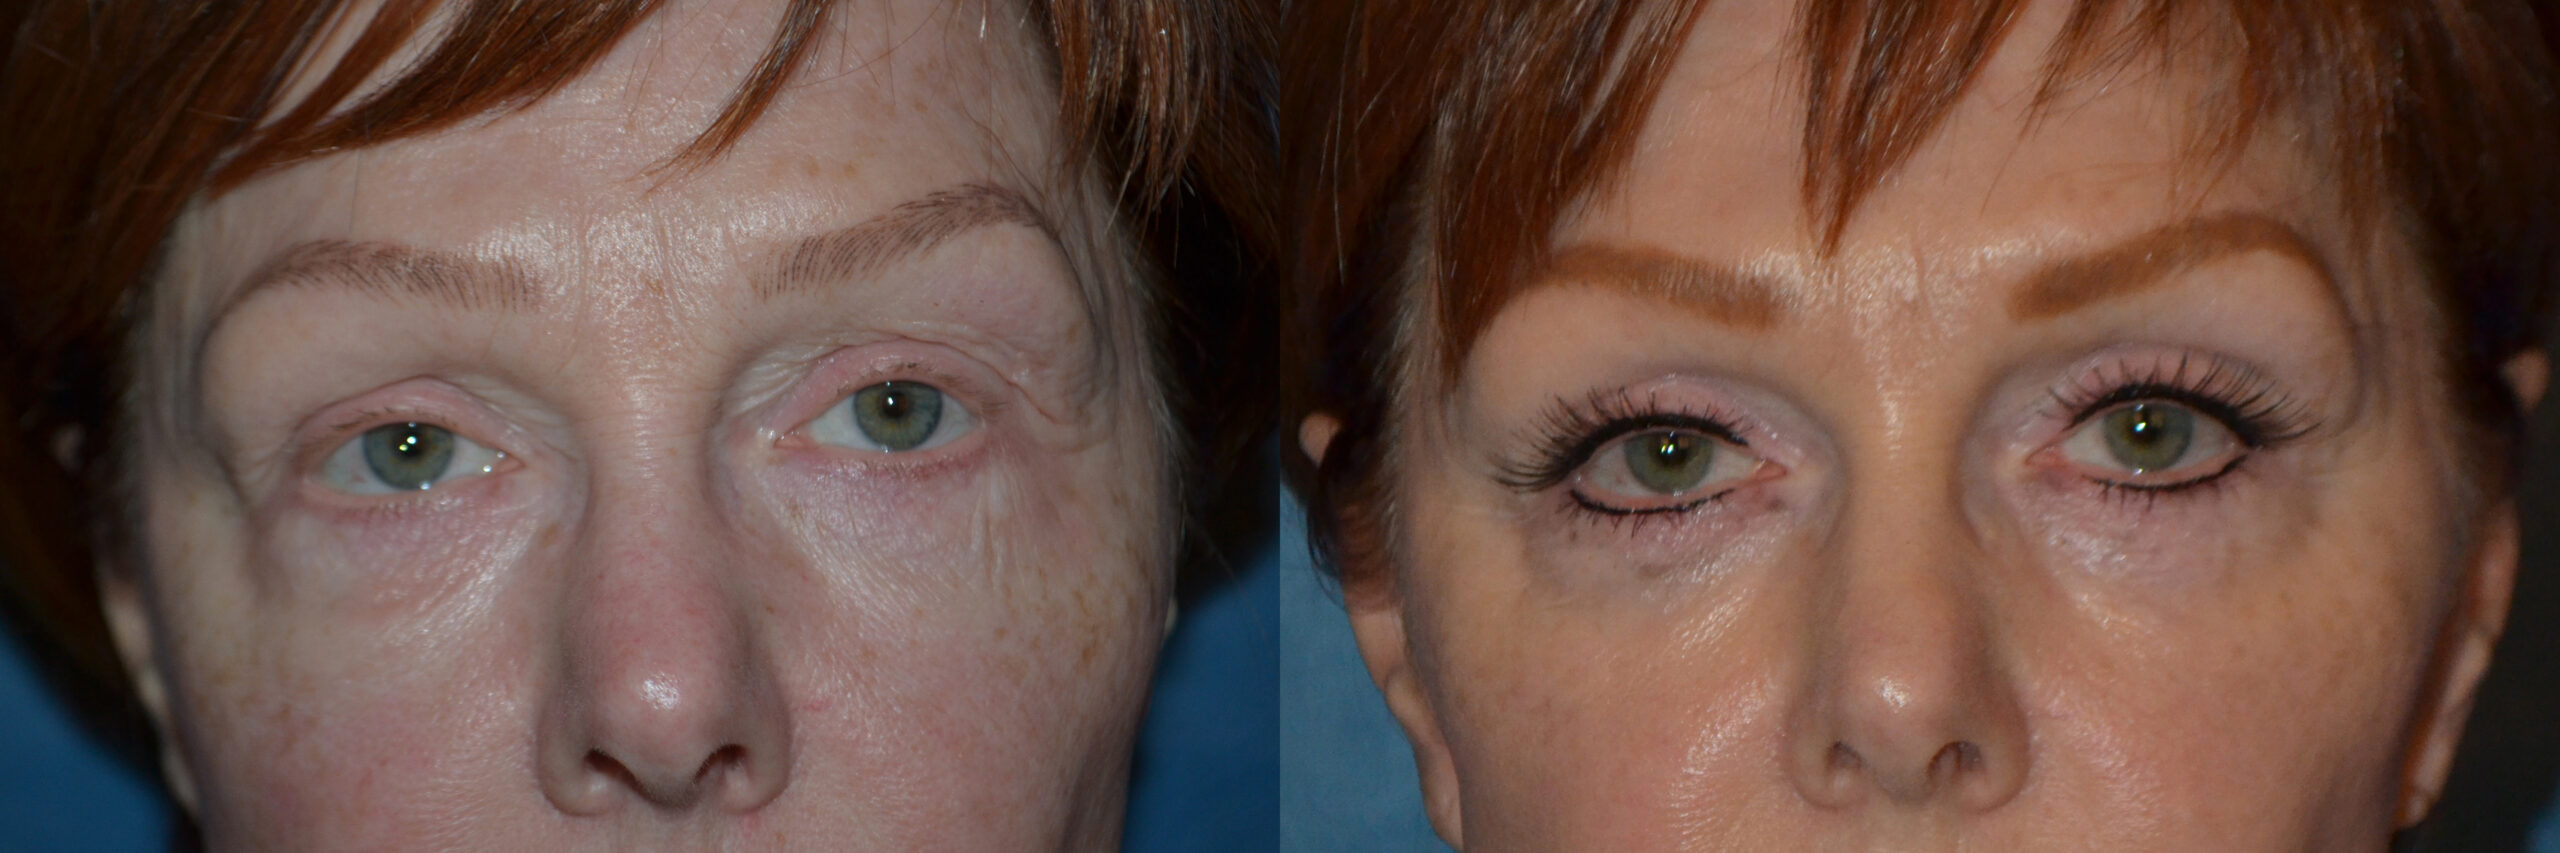 Blepharoplasty (Eyelid Surgery) before and after photo by Dr. Jeffrey L. Williams in Troy, MI